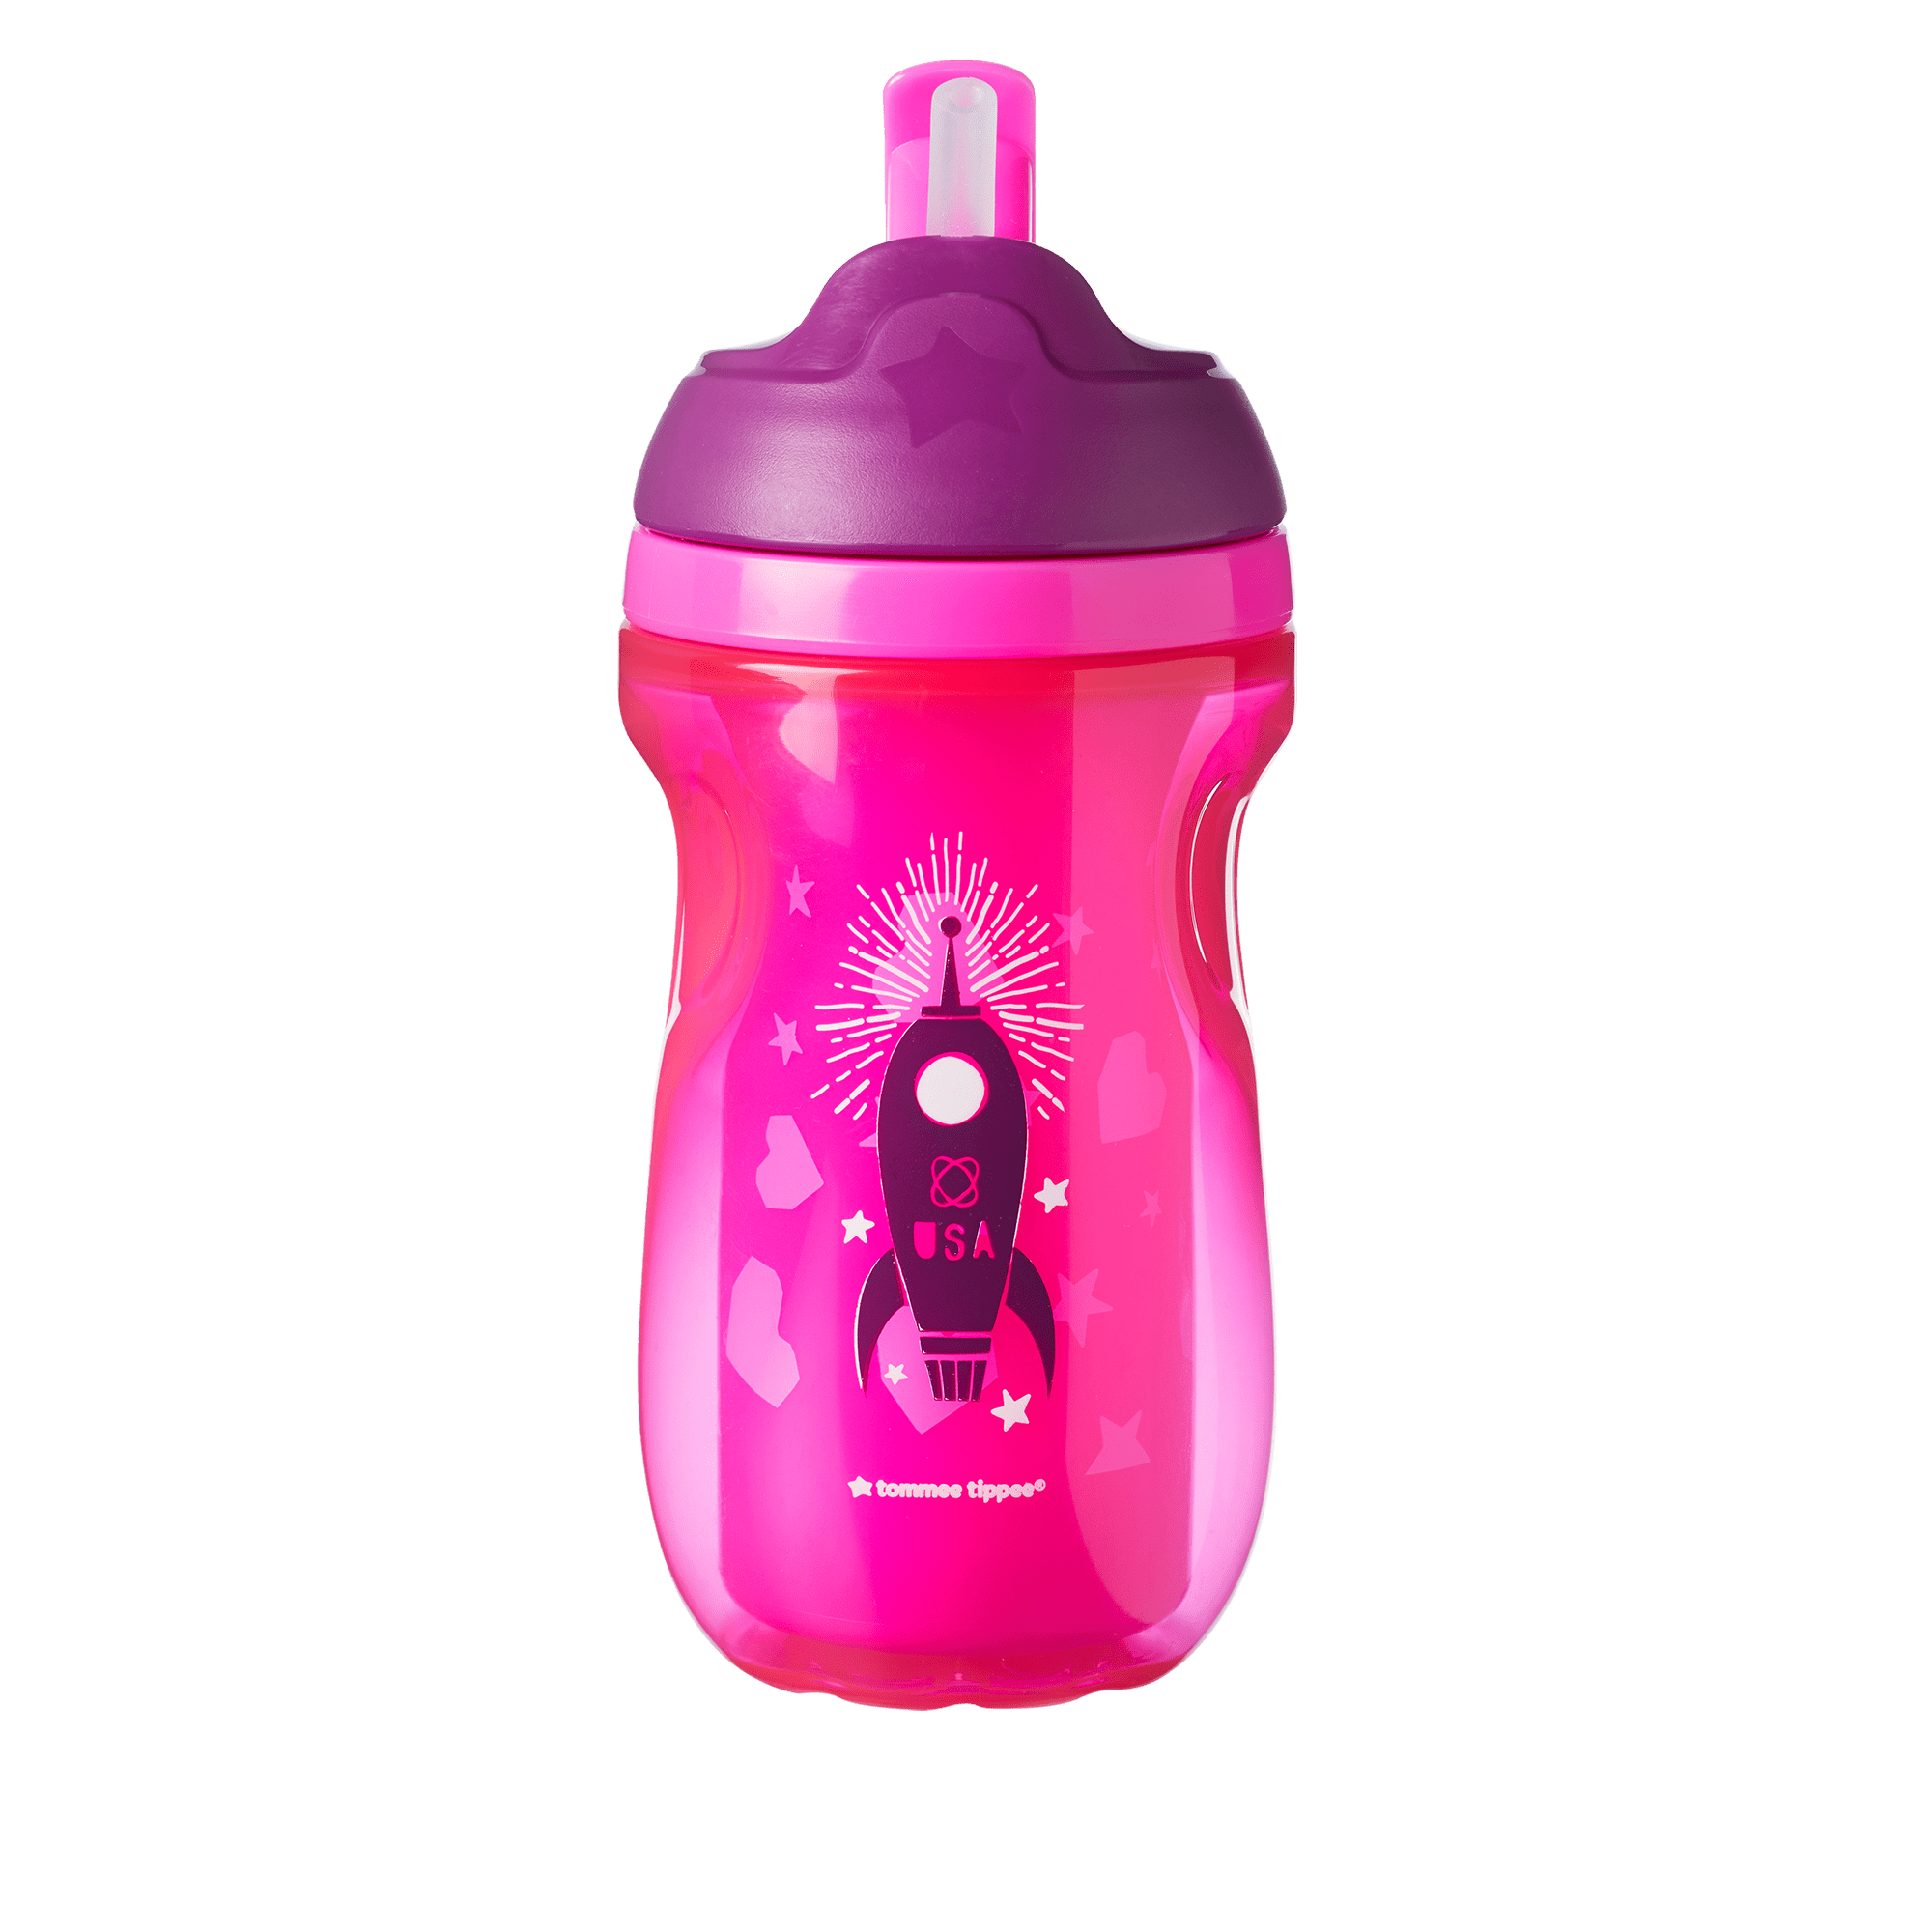 Tommee Tippee Superstar Weighted Straw Cup (6m+, 10oz, Pink)